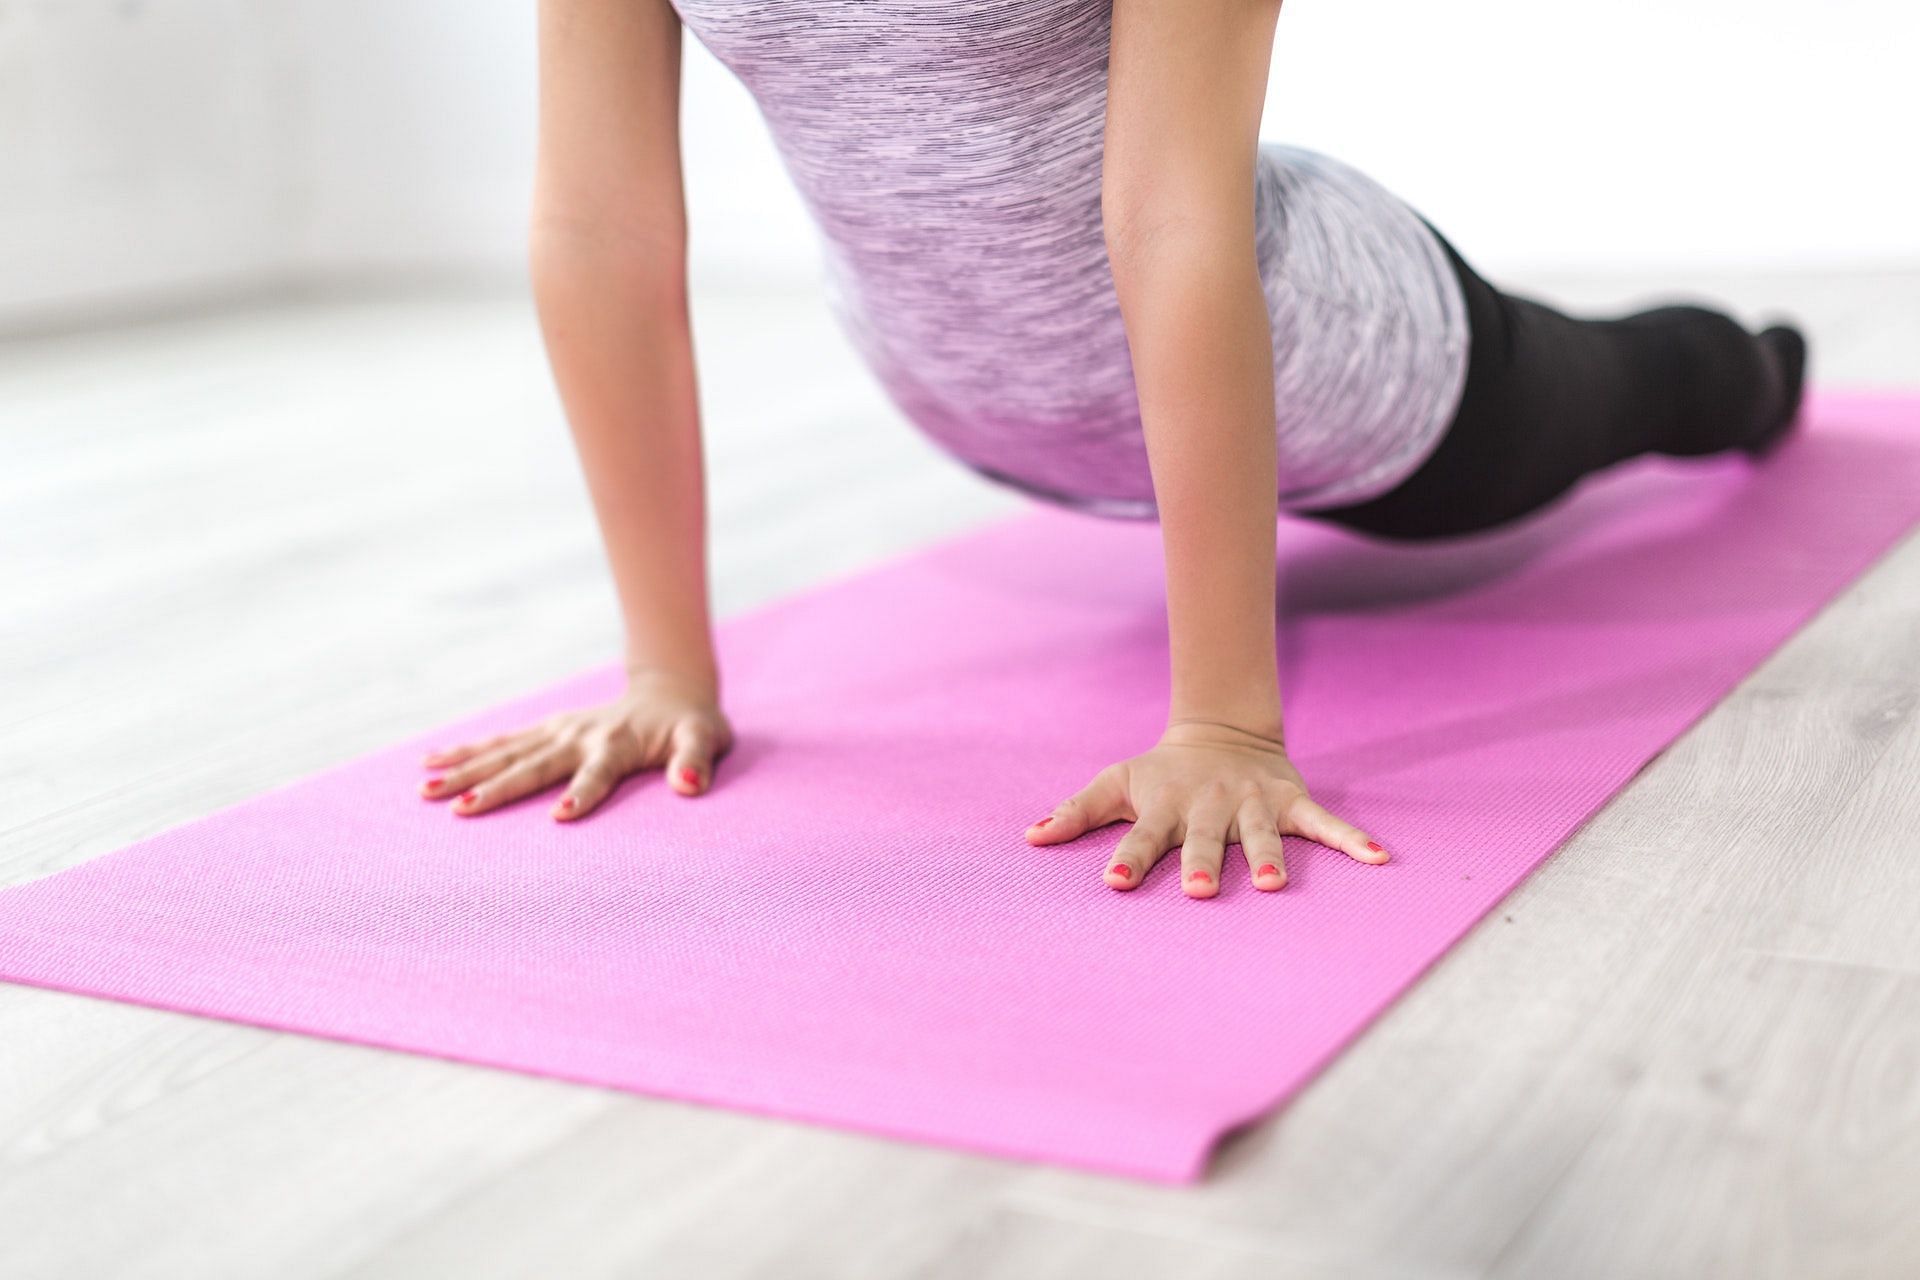 Yoga can potentially help strengthen your back. (Photo by Burst via pexels)